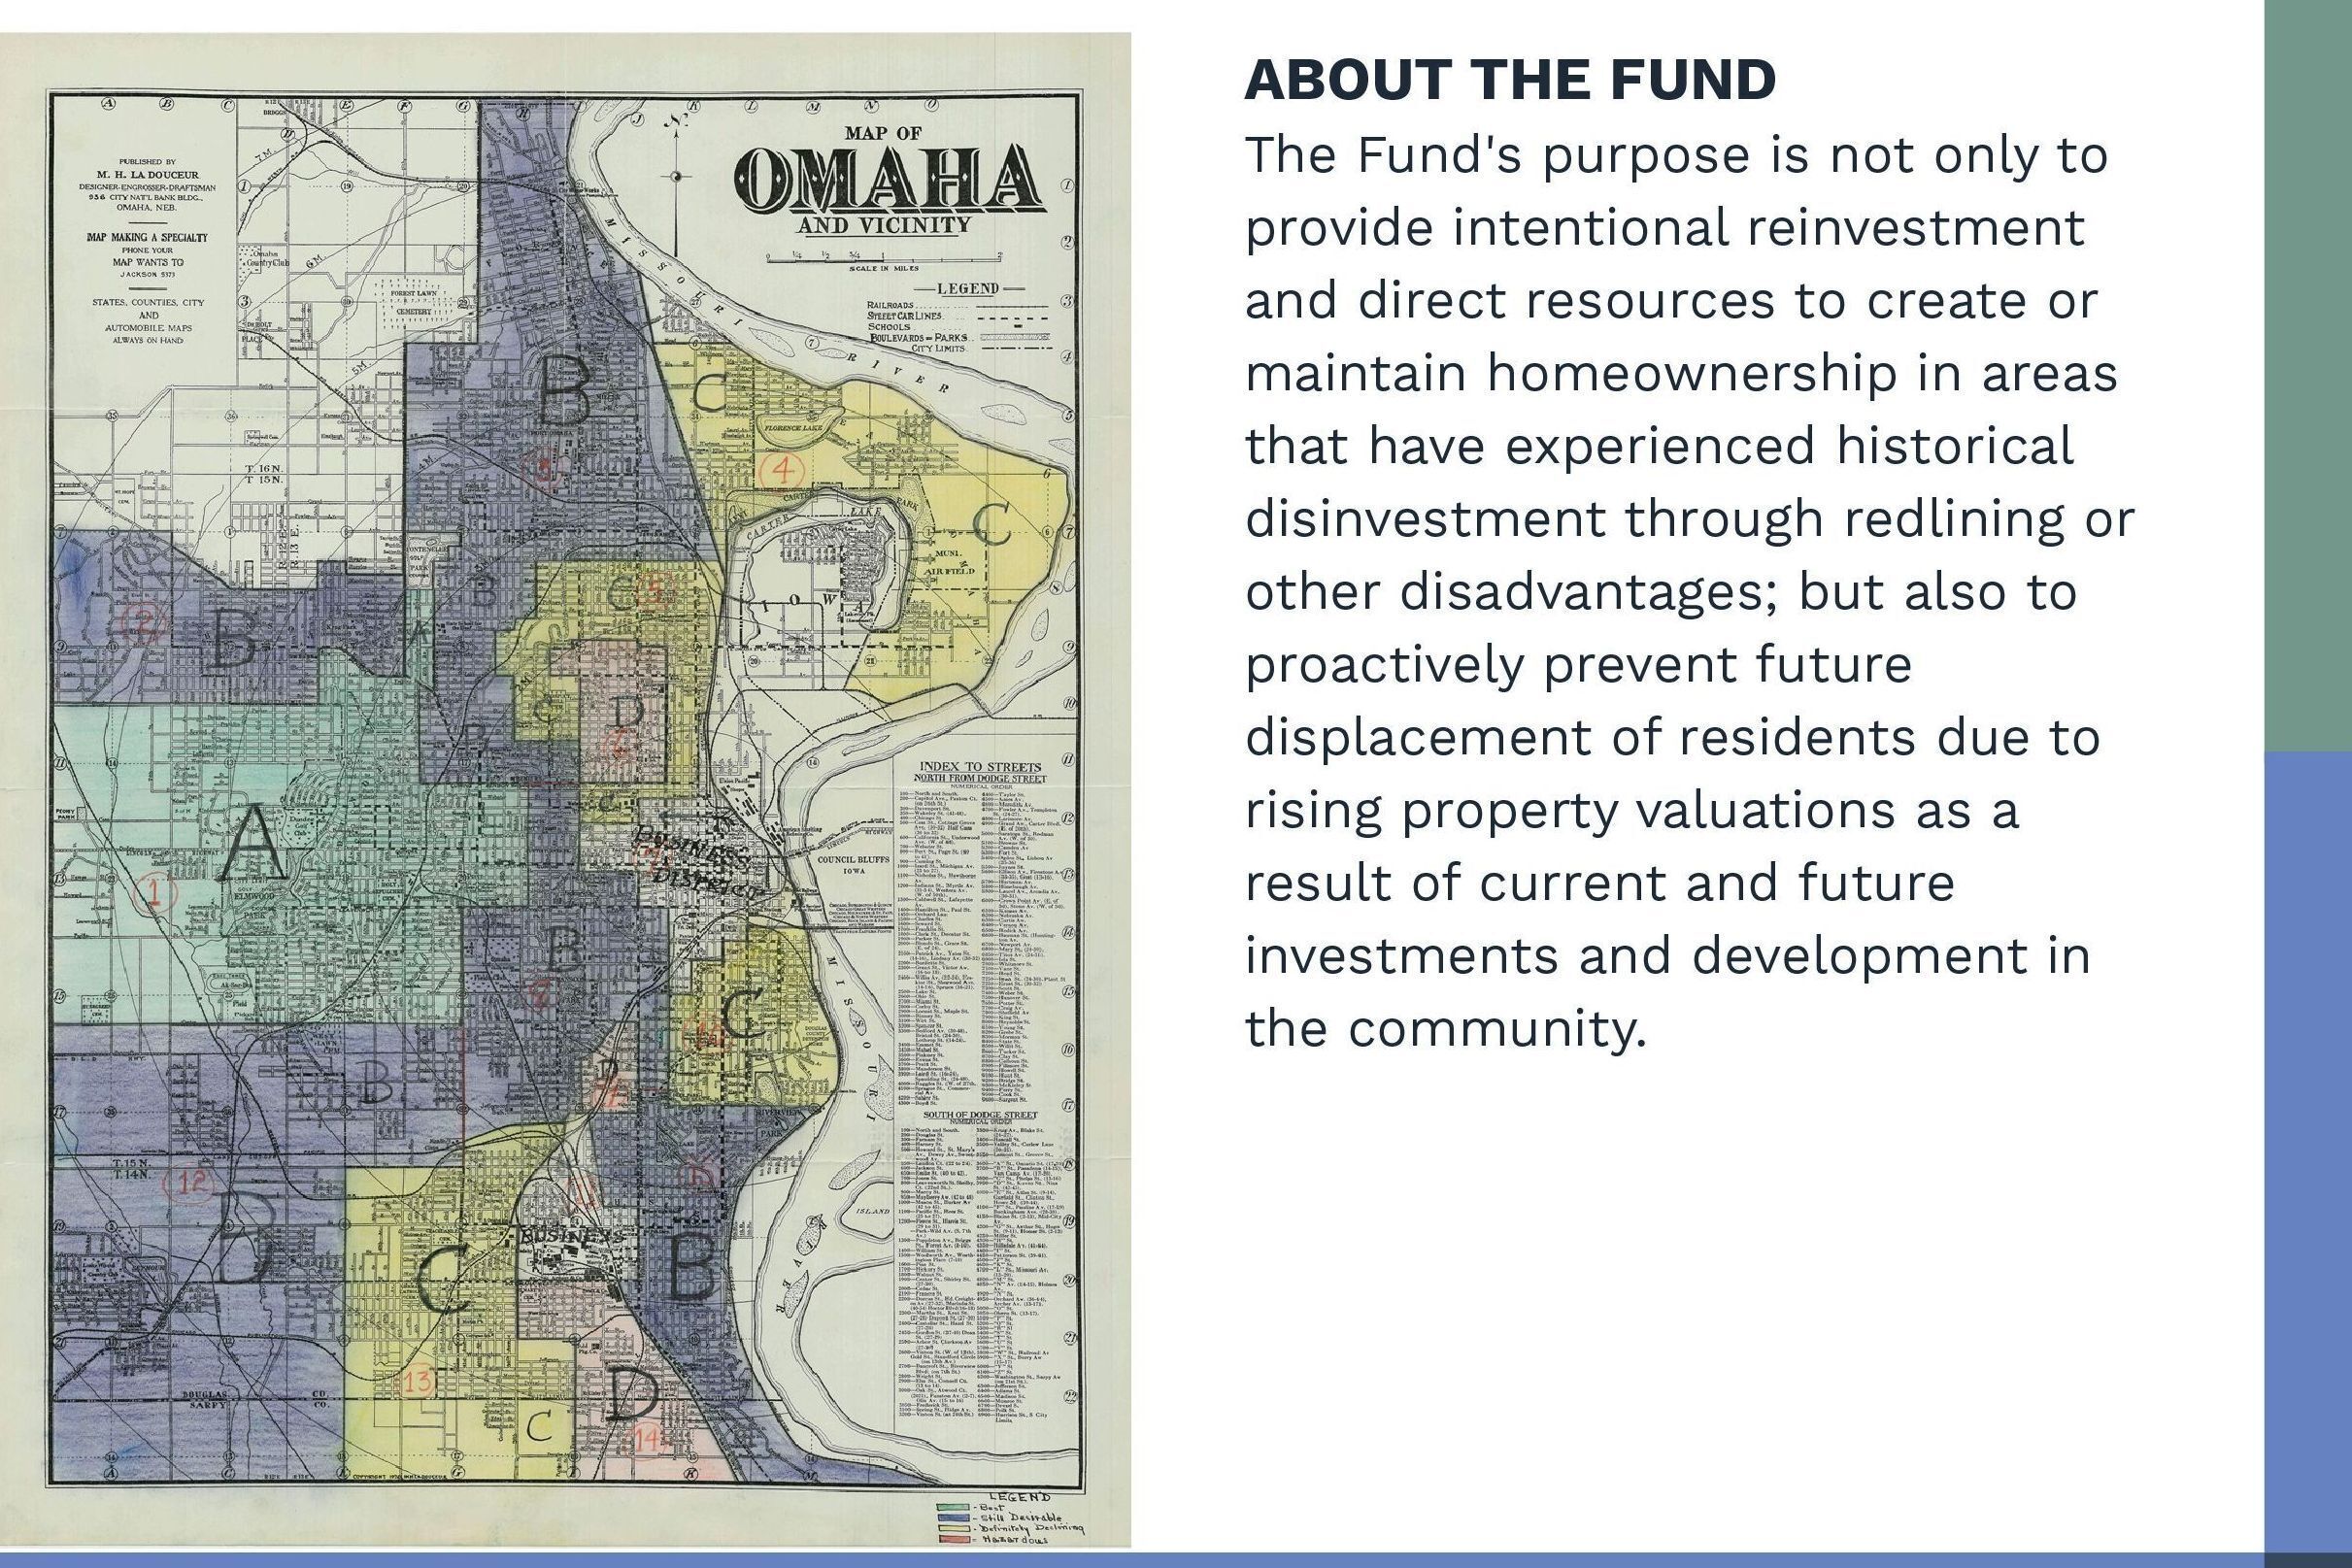 Greenlining Fund launches, offering 0% interest home equity loans in formerly redlined areas of Omaha, Nebraska